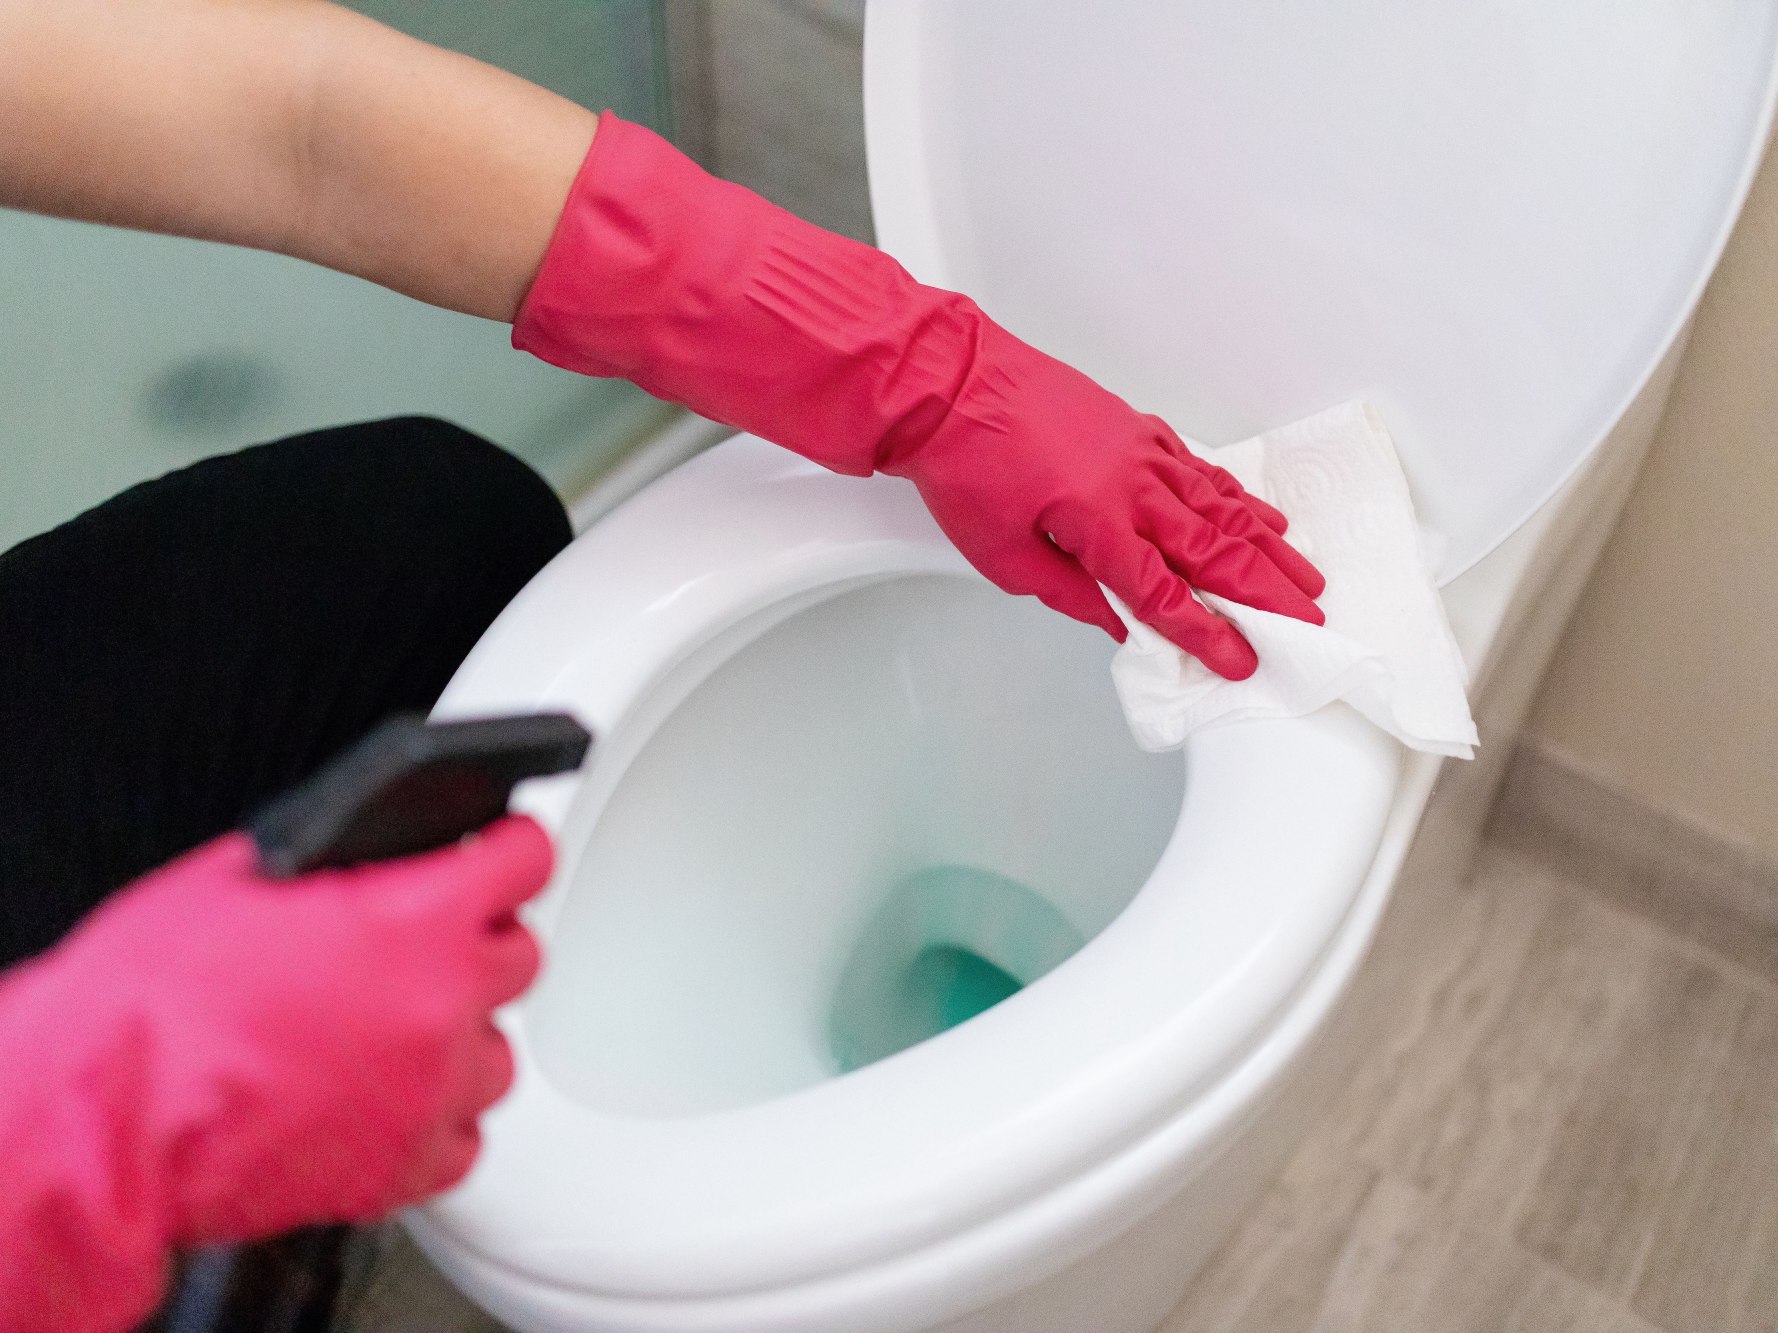 Cleaning and sanitizing restrooms